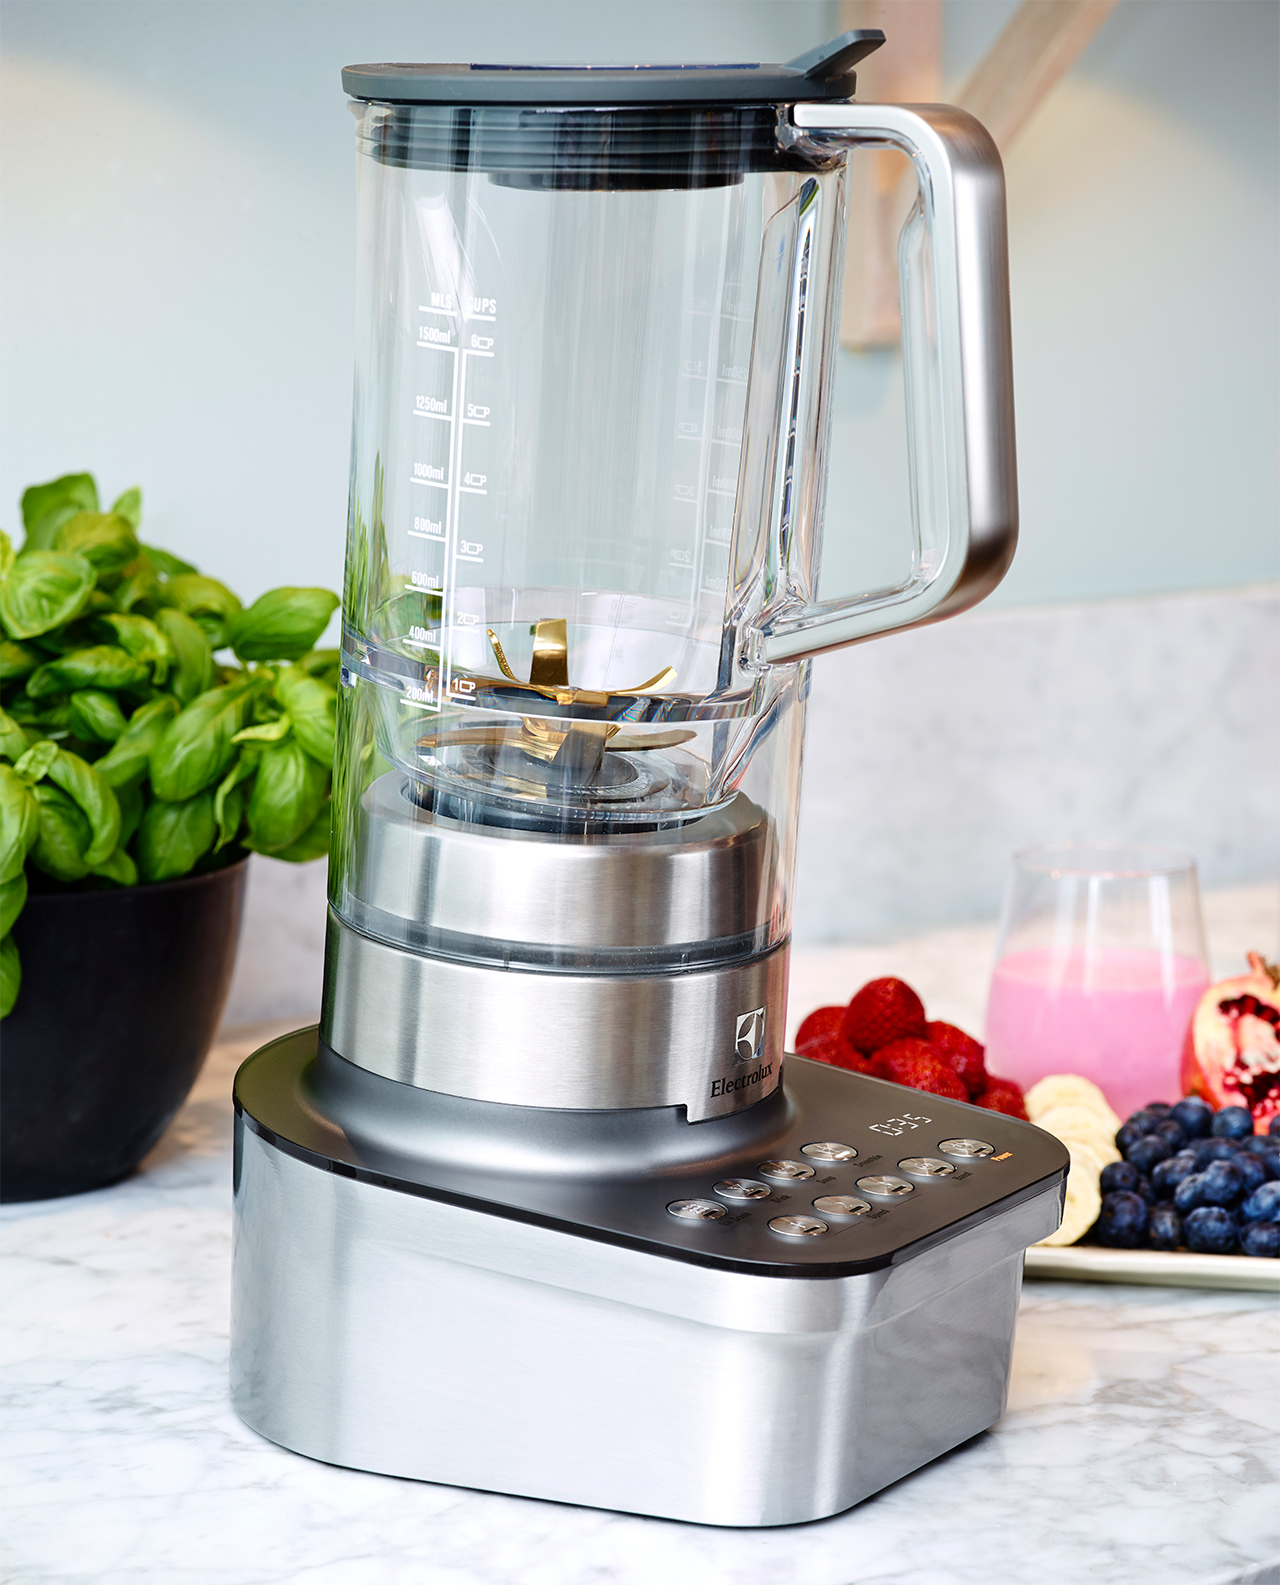 A Tilted Blender Promises To Make Your Smoothies Actually Taste Better